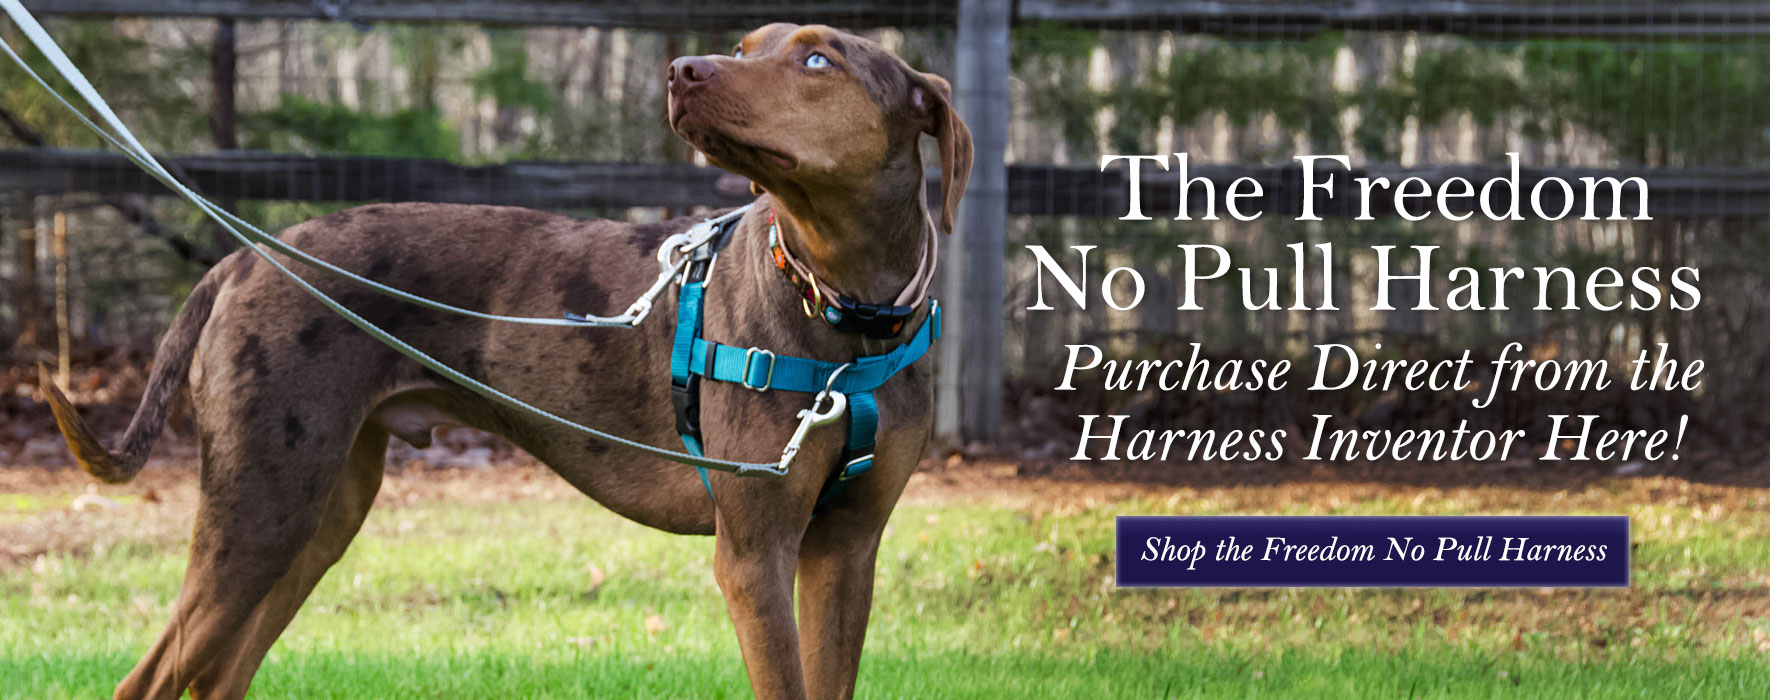 Shop the Freedom No Pull Harness